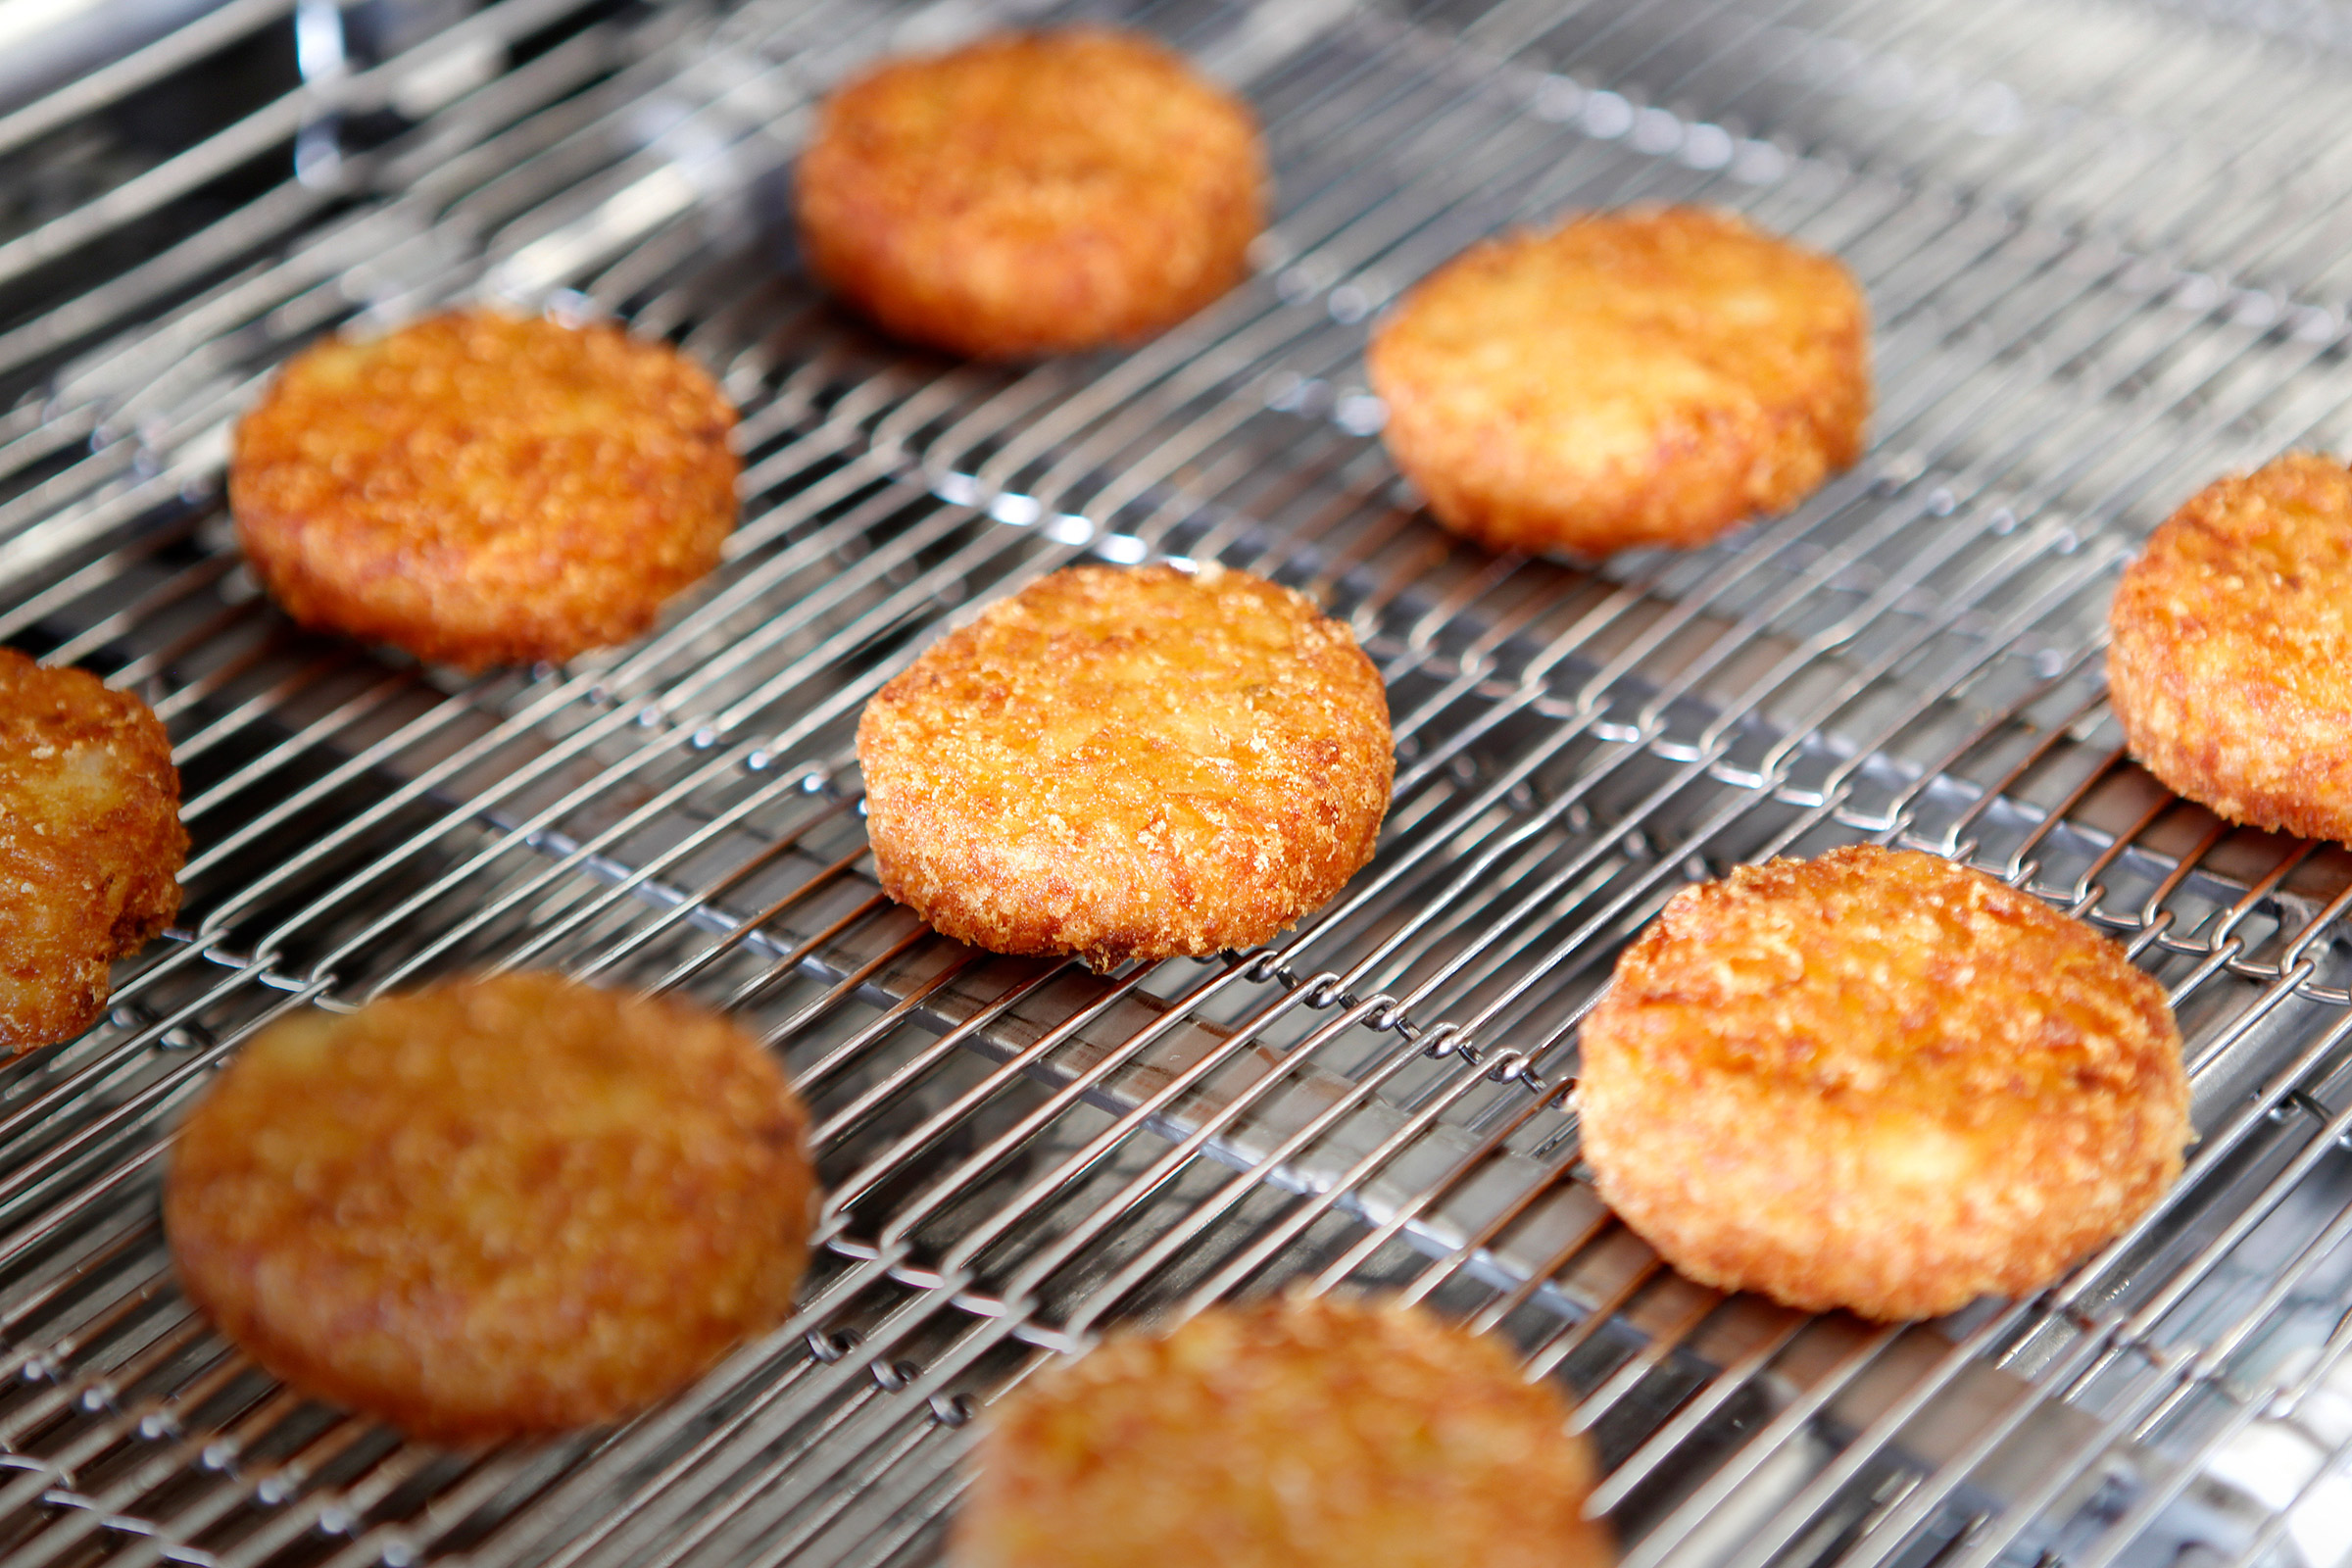 Frying cheese products